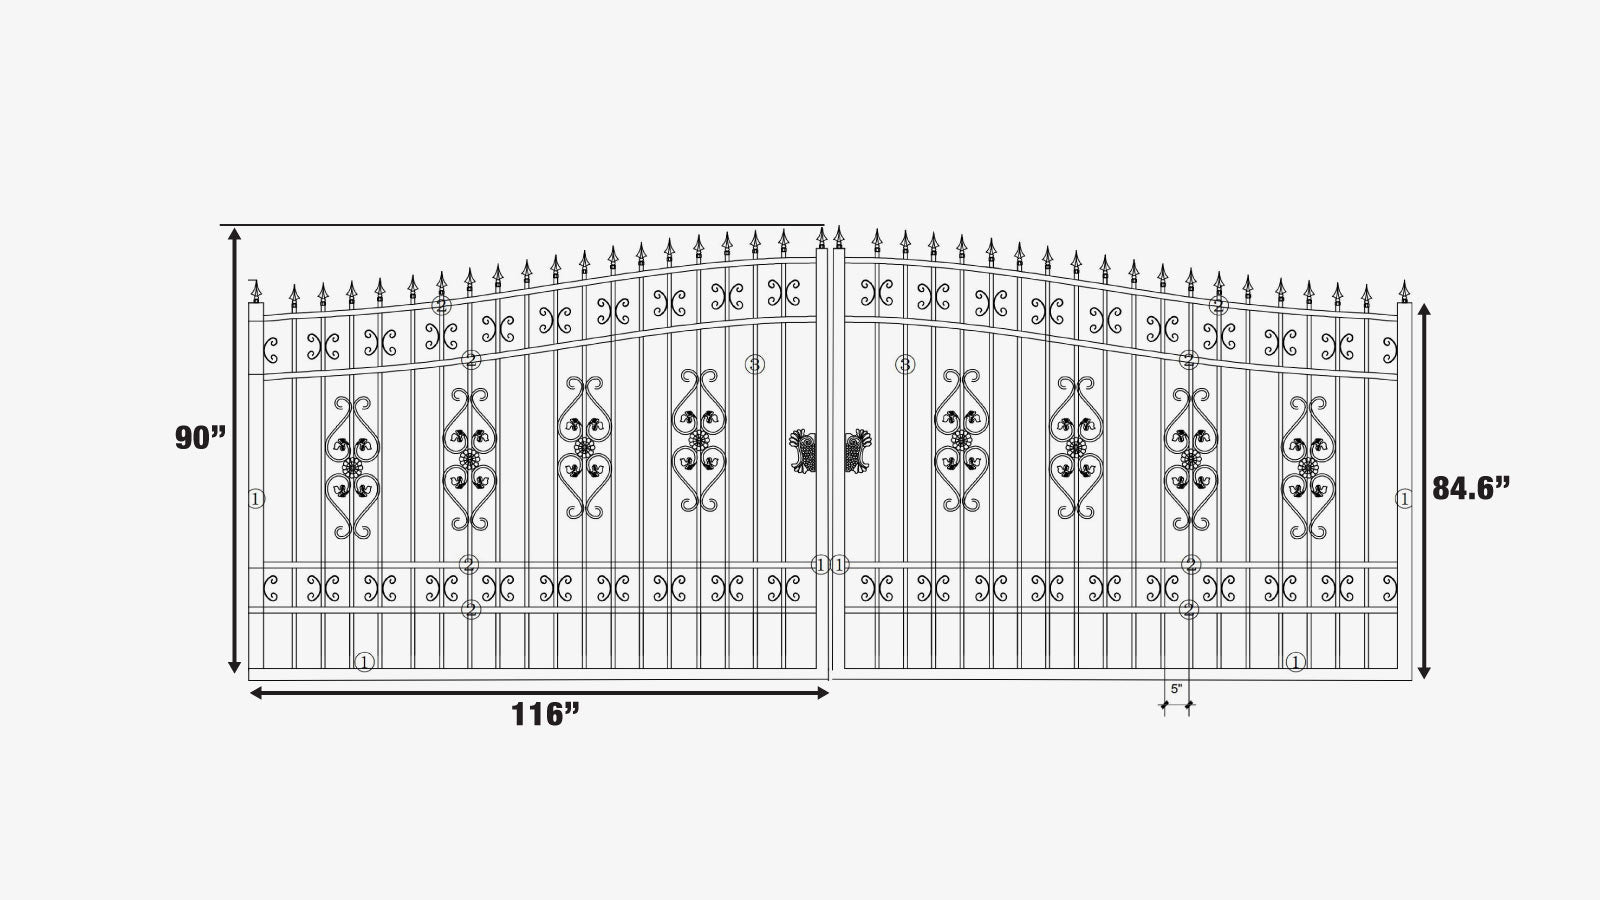 TMG Industrial 20-ft Bi-Parting Deluxe Wrought Iron Ornamental Gate, 100% Solid Forged Steel, Powder Coated, TMG-MG20-specifications-image